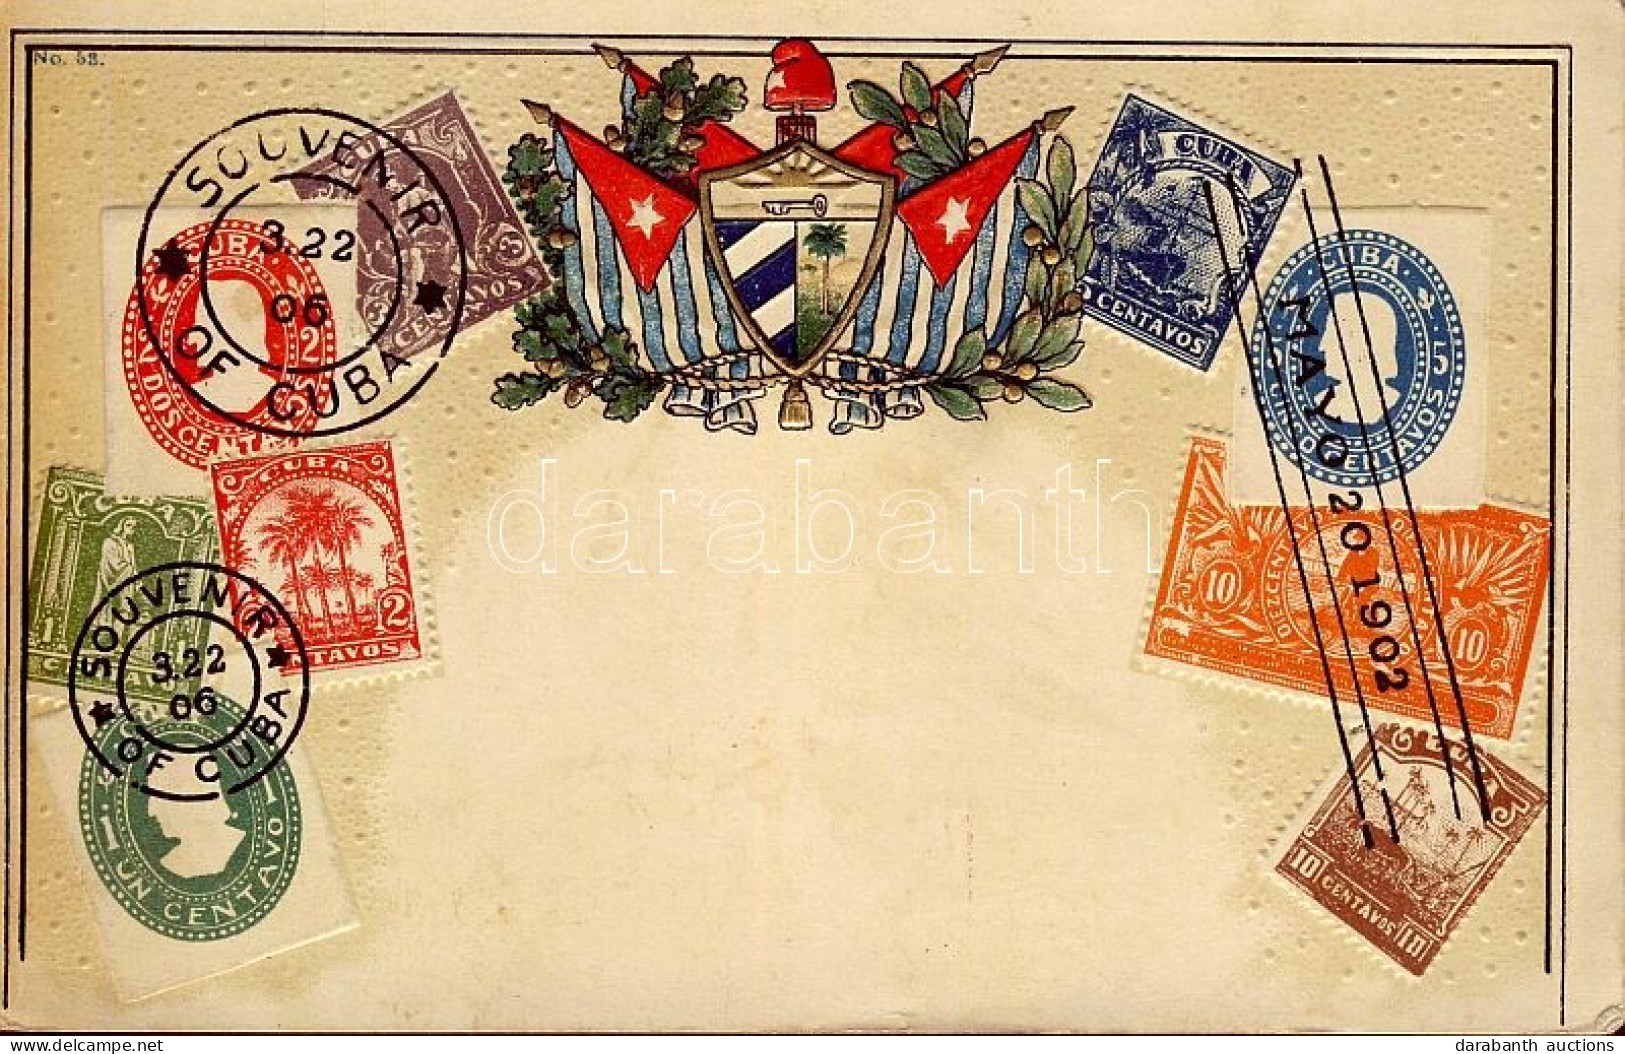 T2/T3 Stamps Of Cuba, Coat Of Arms, Golden Decoration, Flags, Emb. Litho (small Tear) - Unclassified